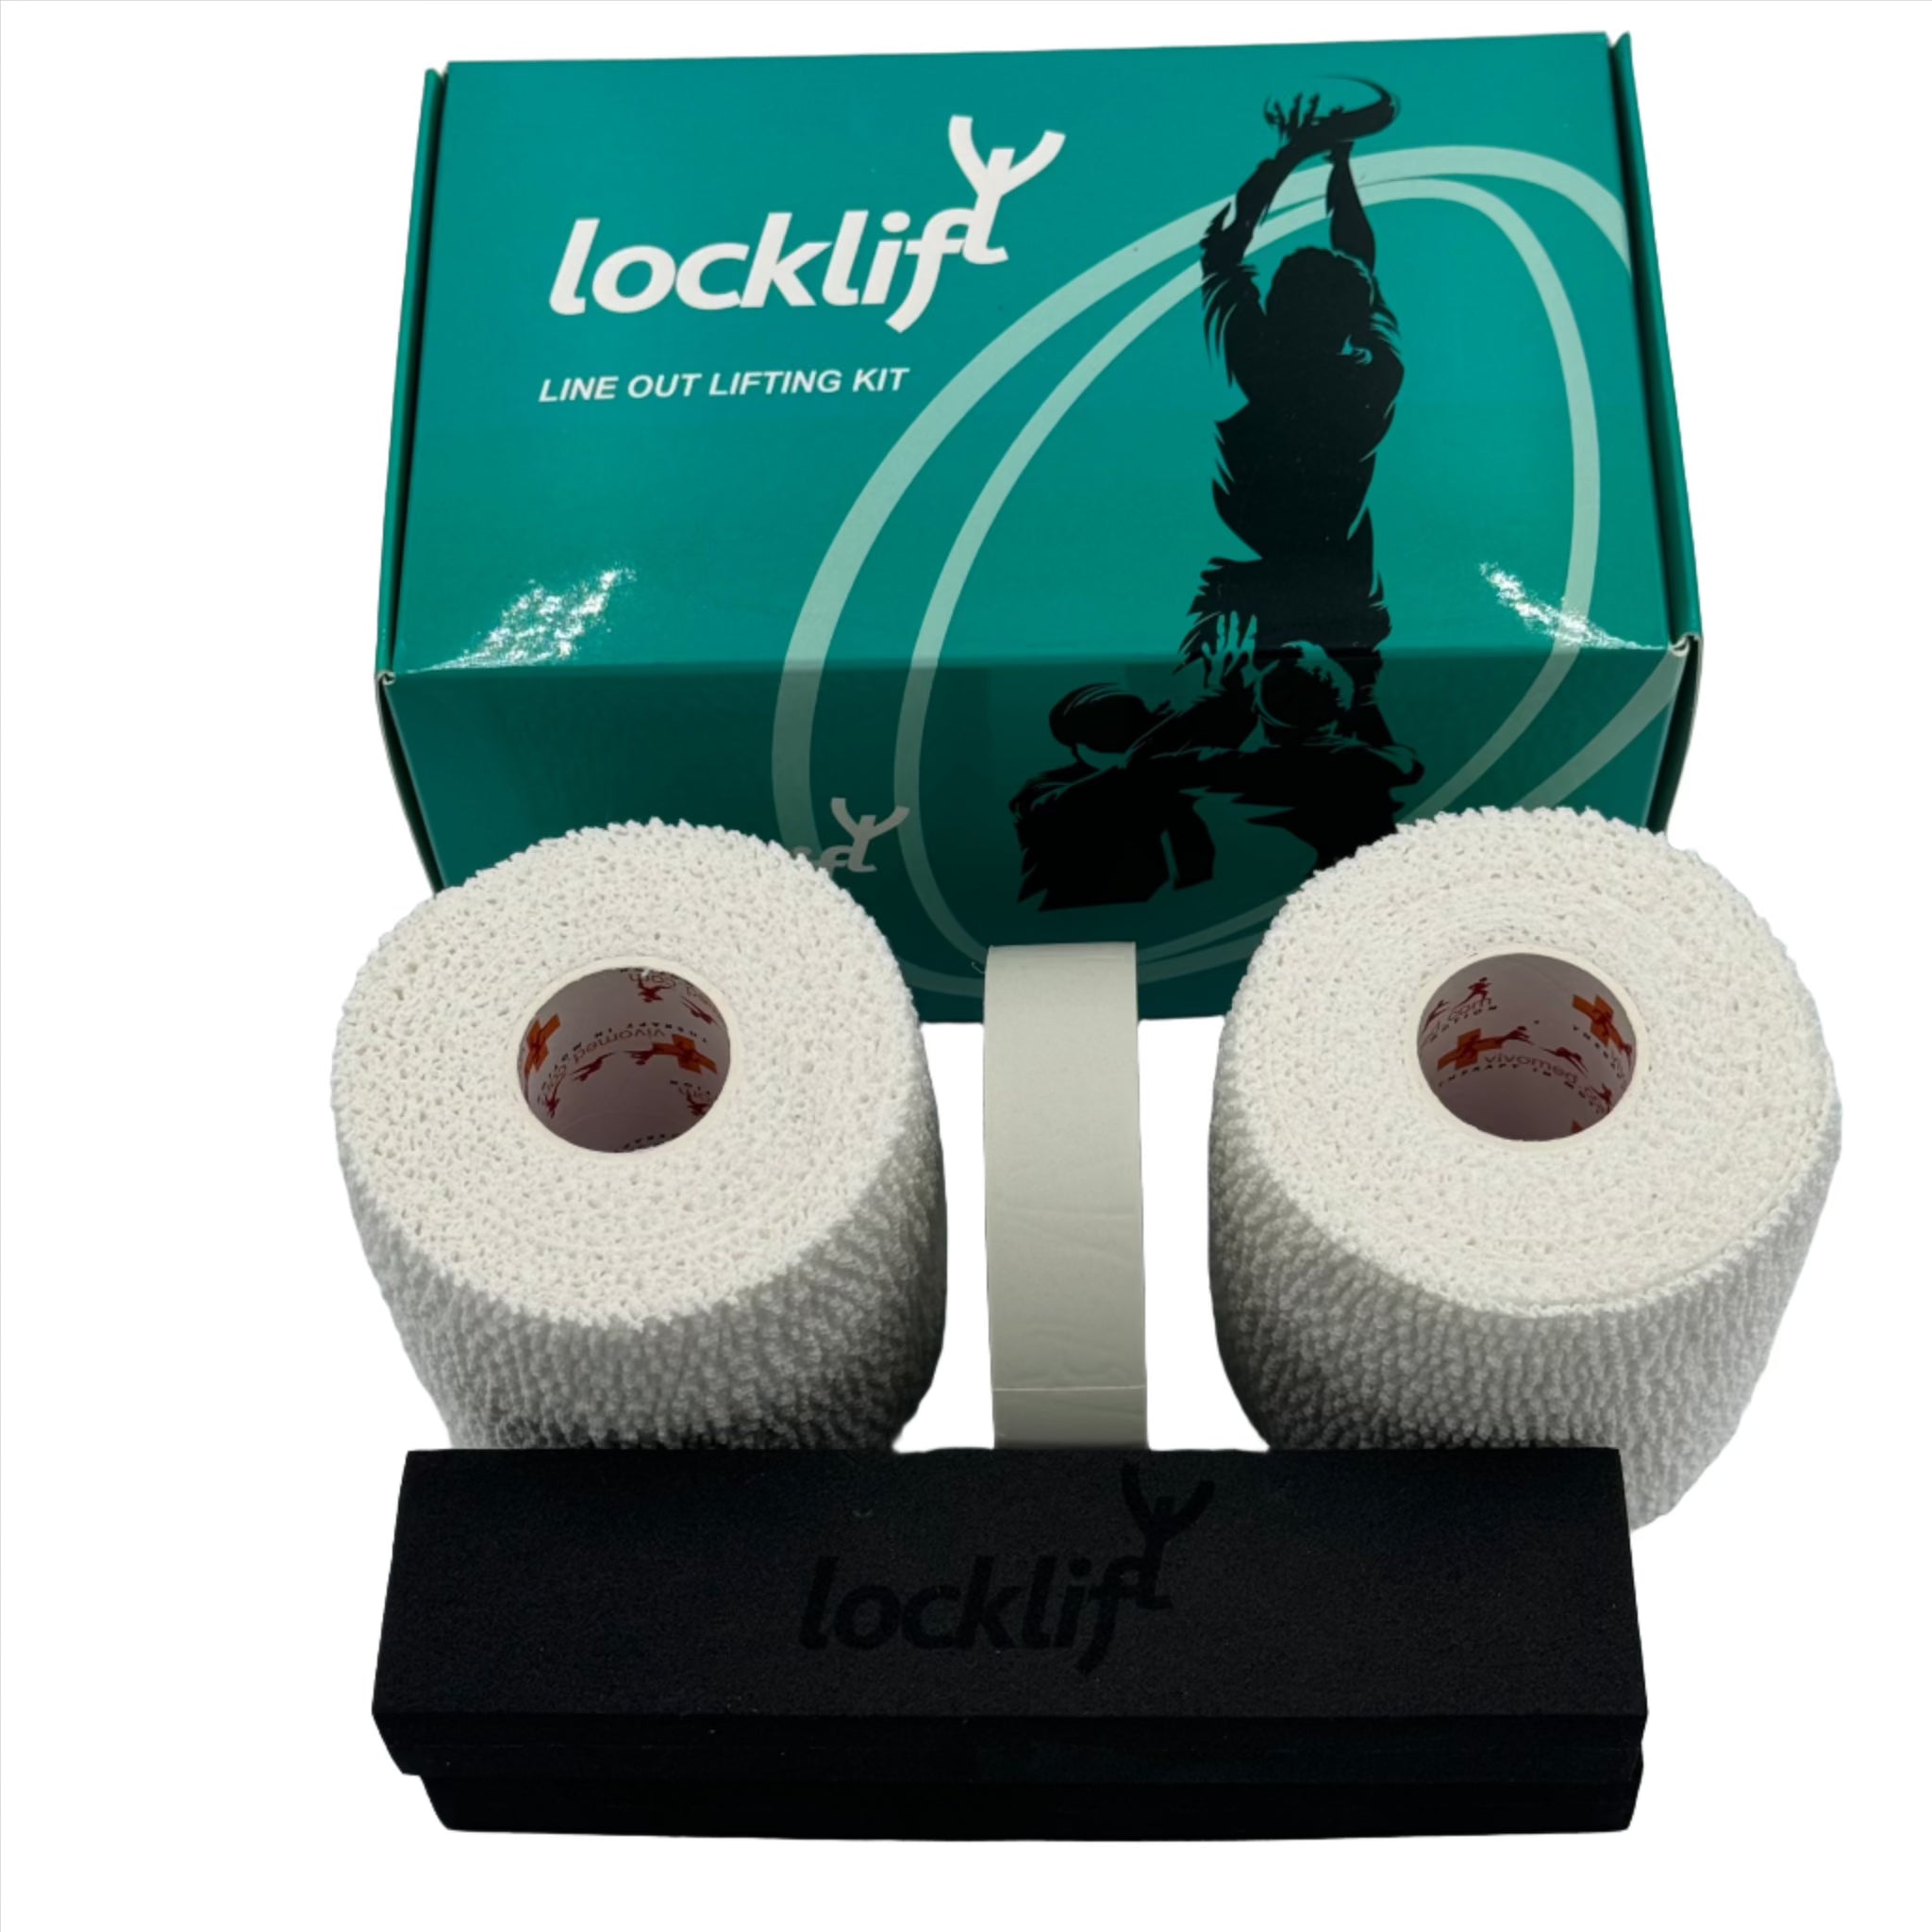 locklift rugby thigh taping kit